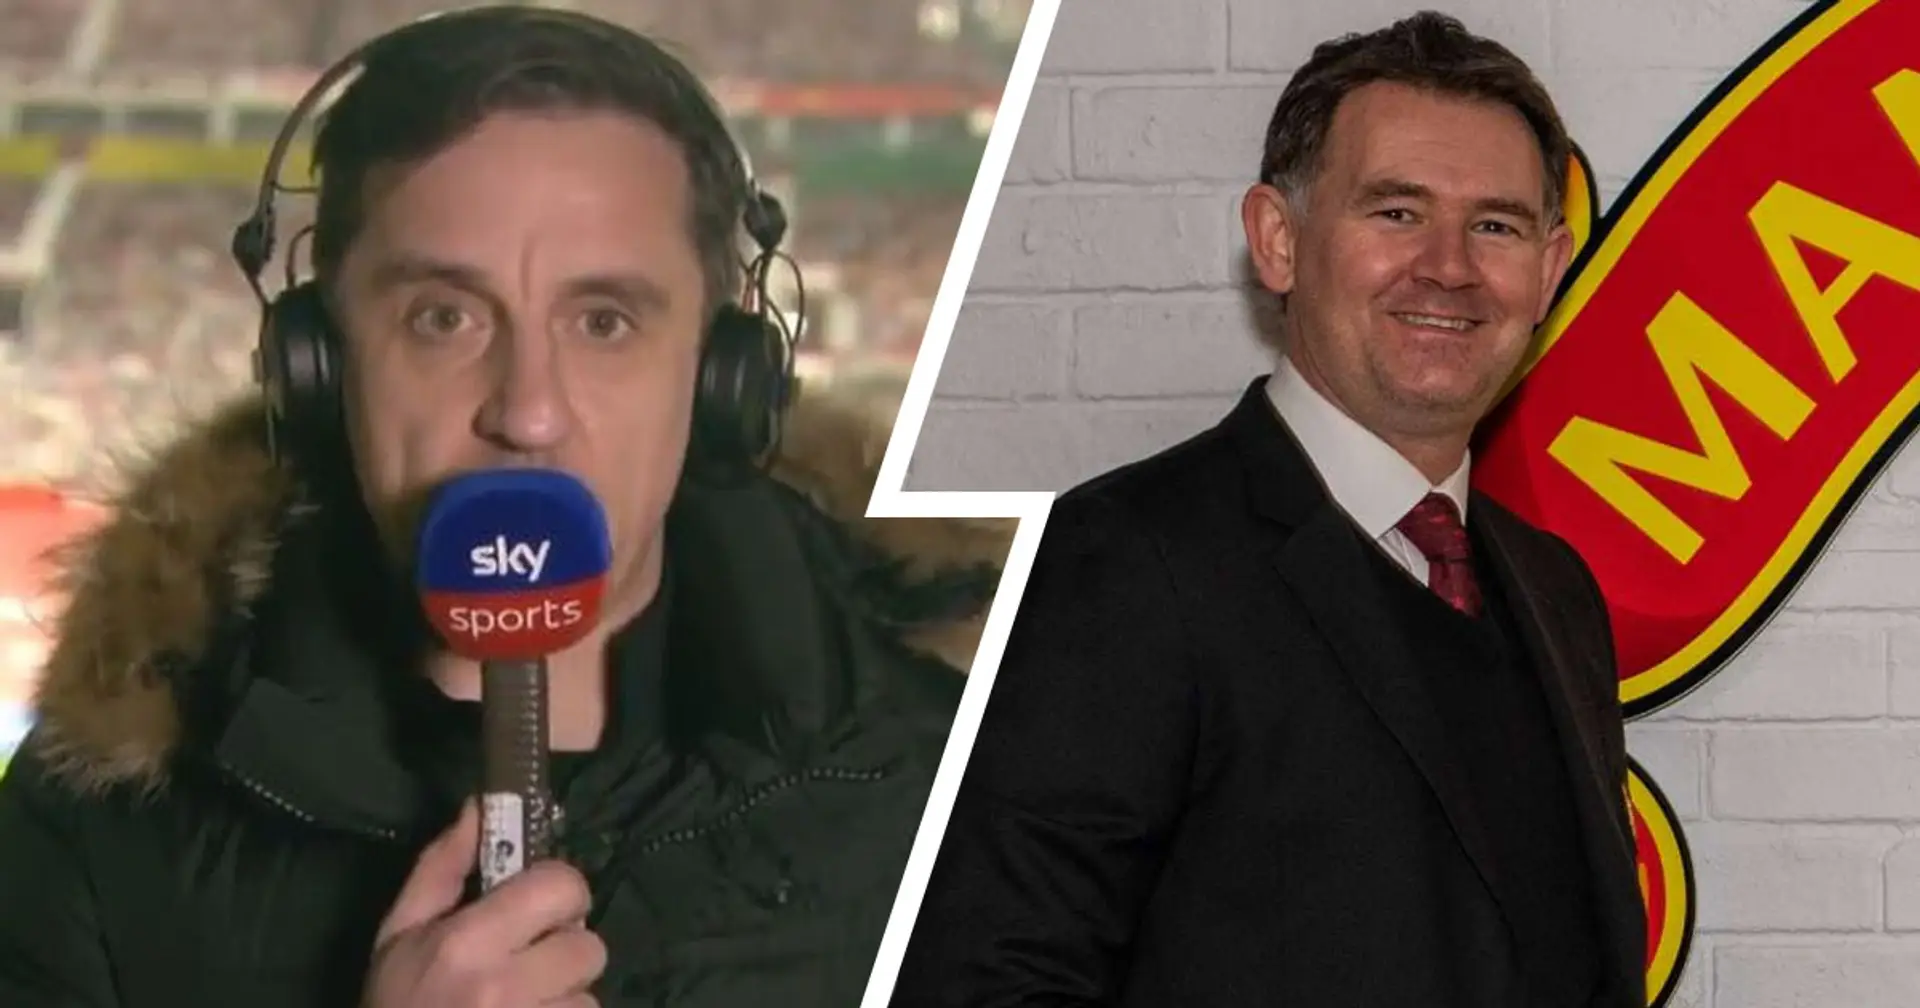 Gary Neville: ‘I don’t see the Director of Football appointment being critical to United winning the league in the next few years’